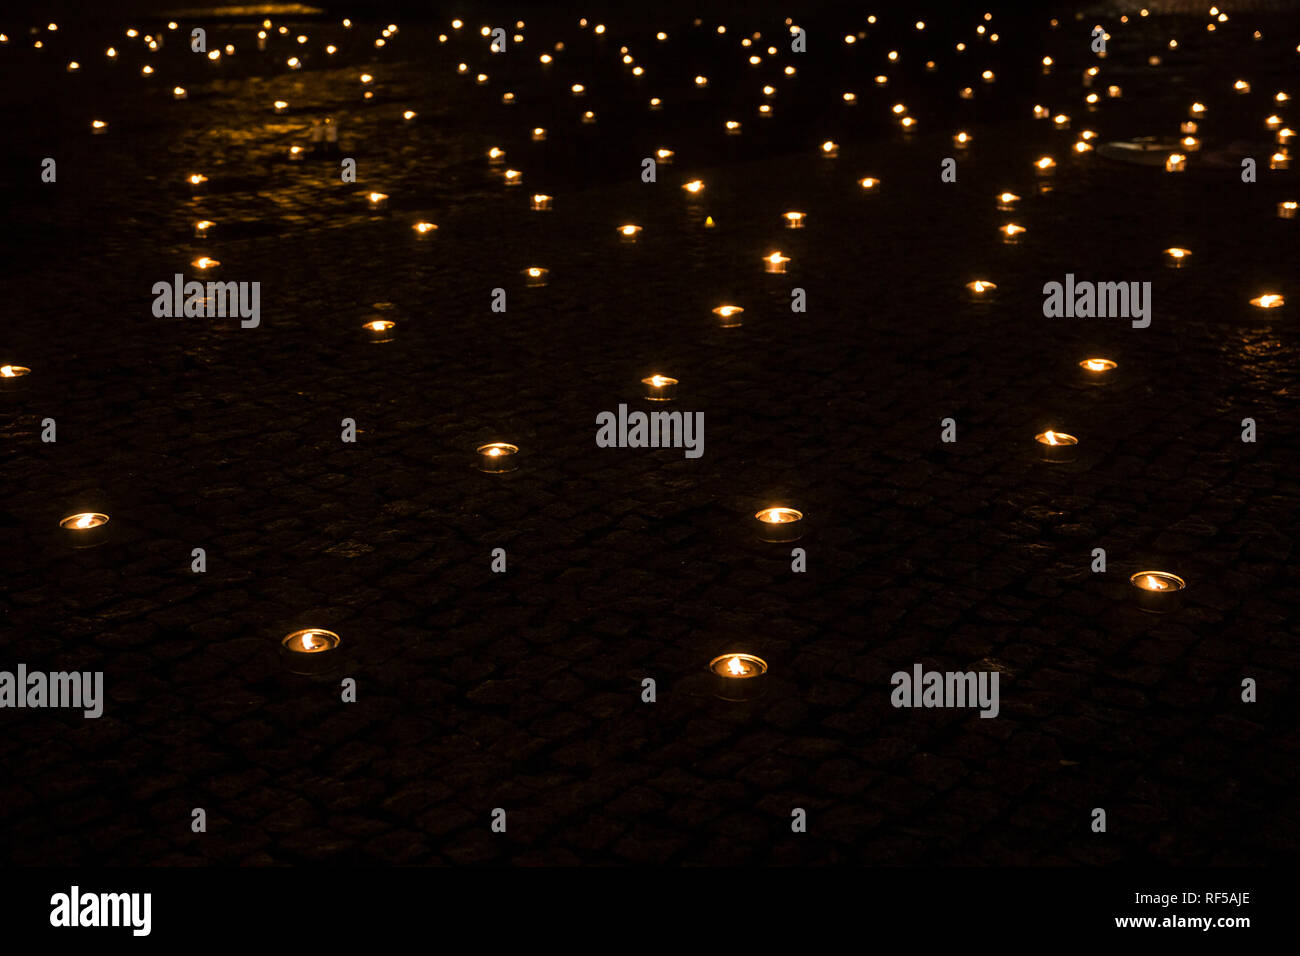 A lot of lit outdoor candles(also known as pitch torch or a garden candle), a lot of out of focus candles burning on the background at night. Stock Photo